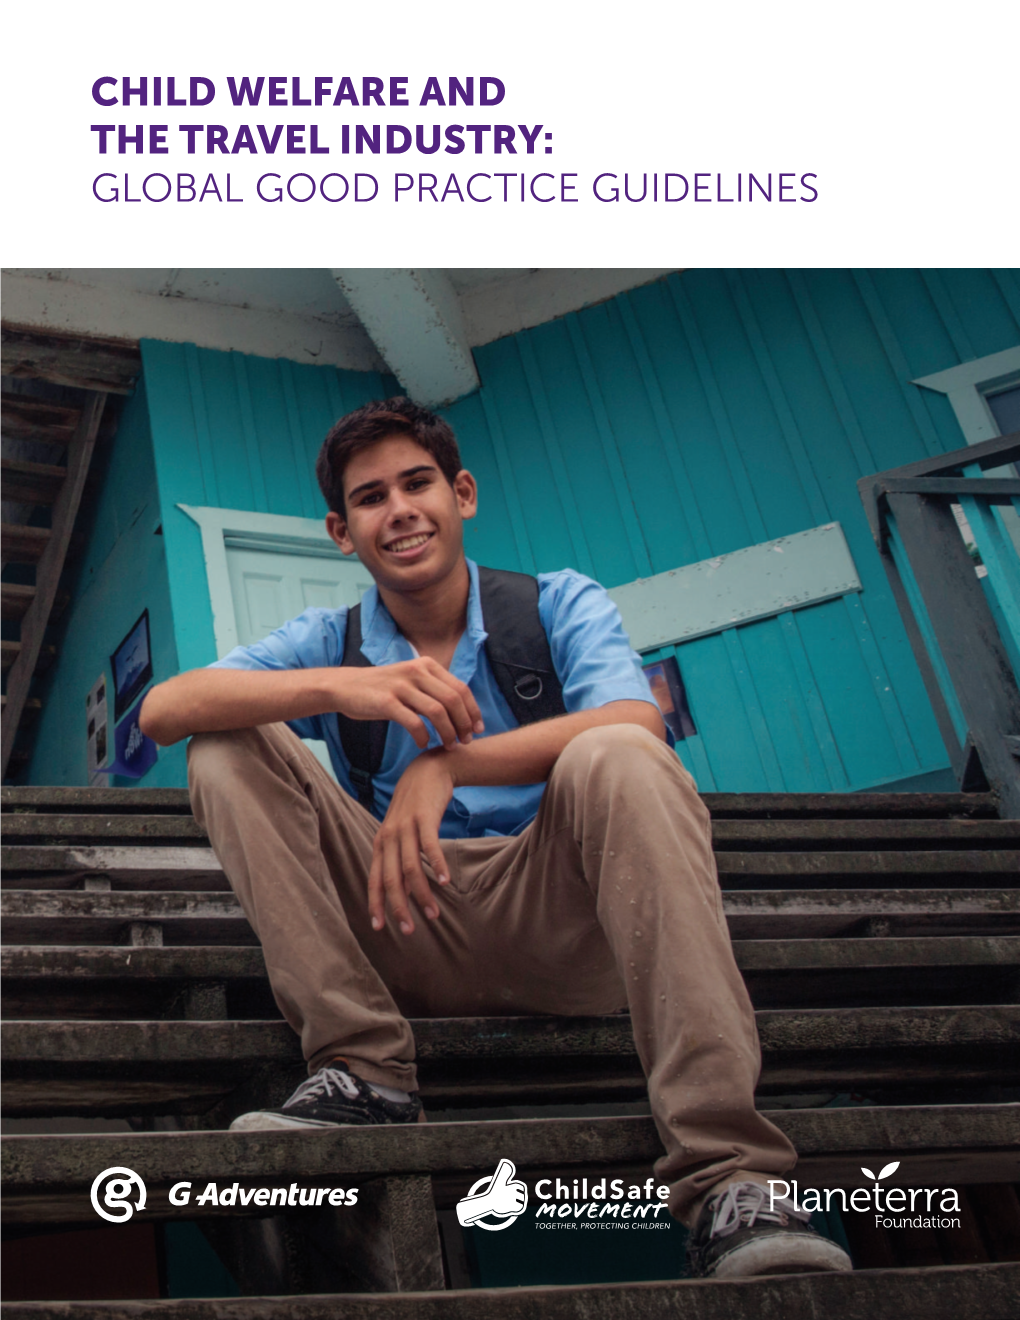 Child Welfare and the Travel Industry: Global Good Practice Guidelines Contents Acknowledgements